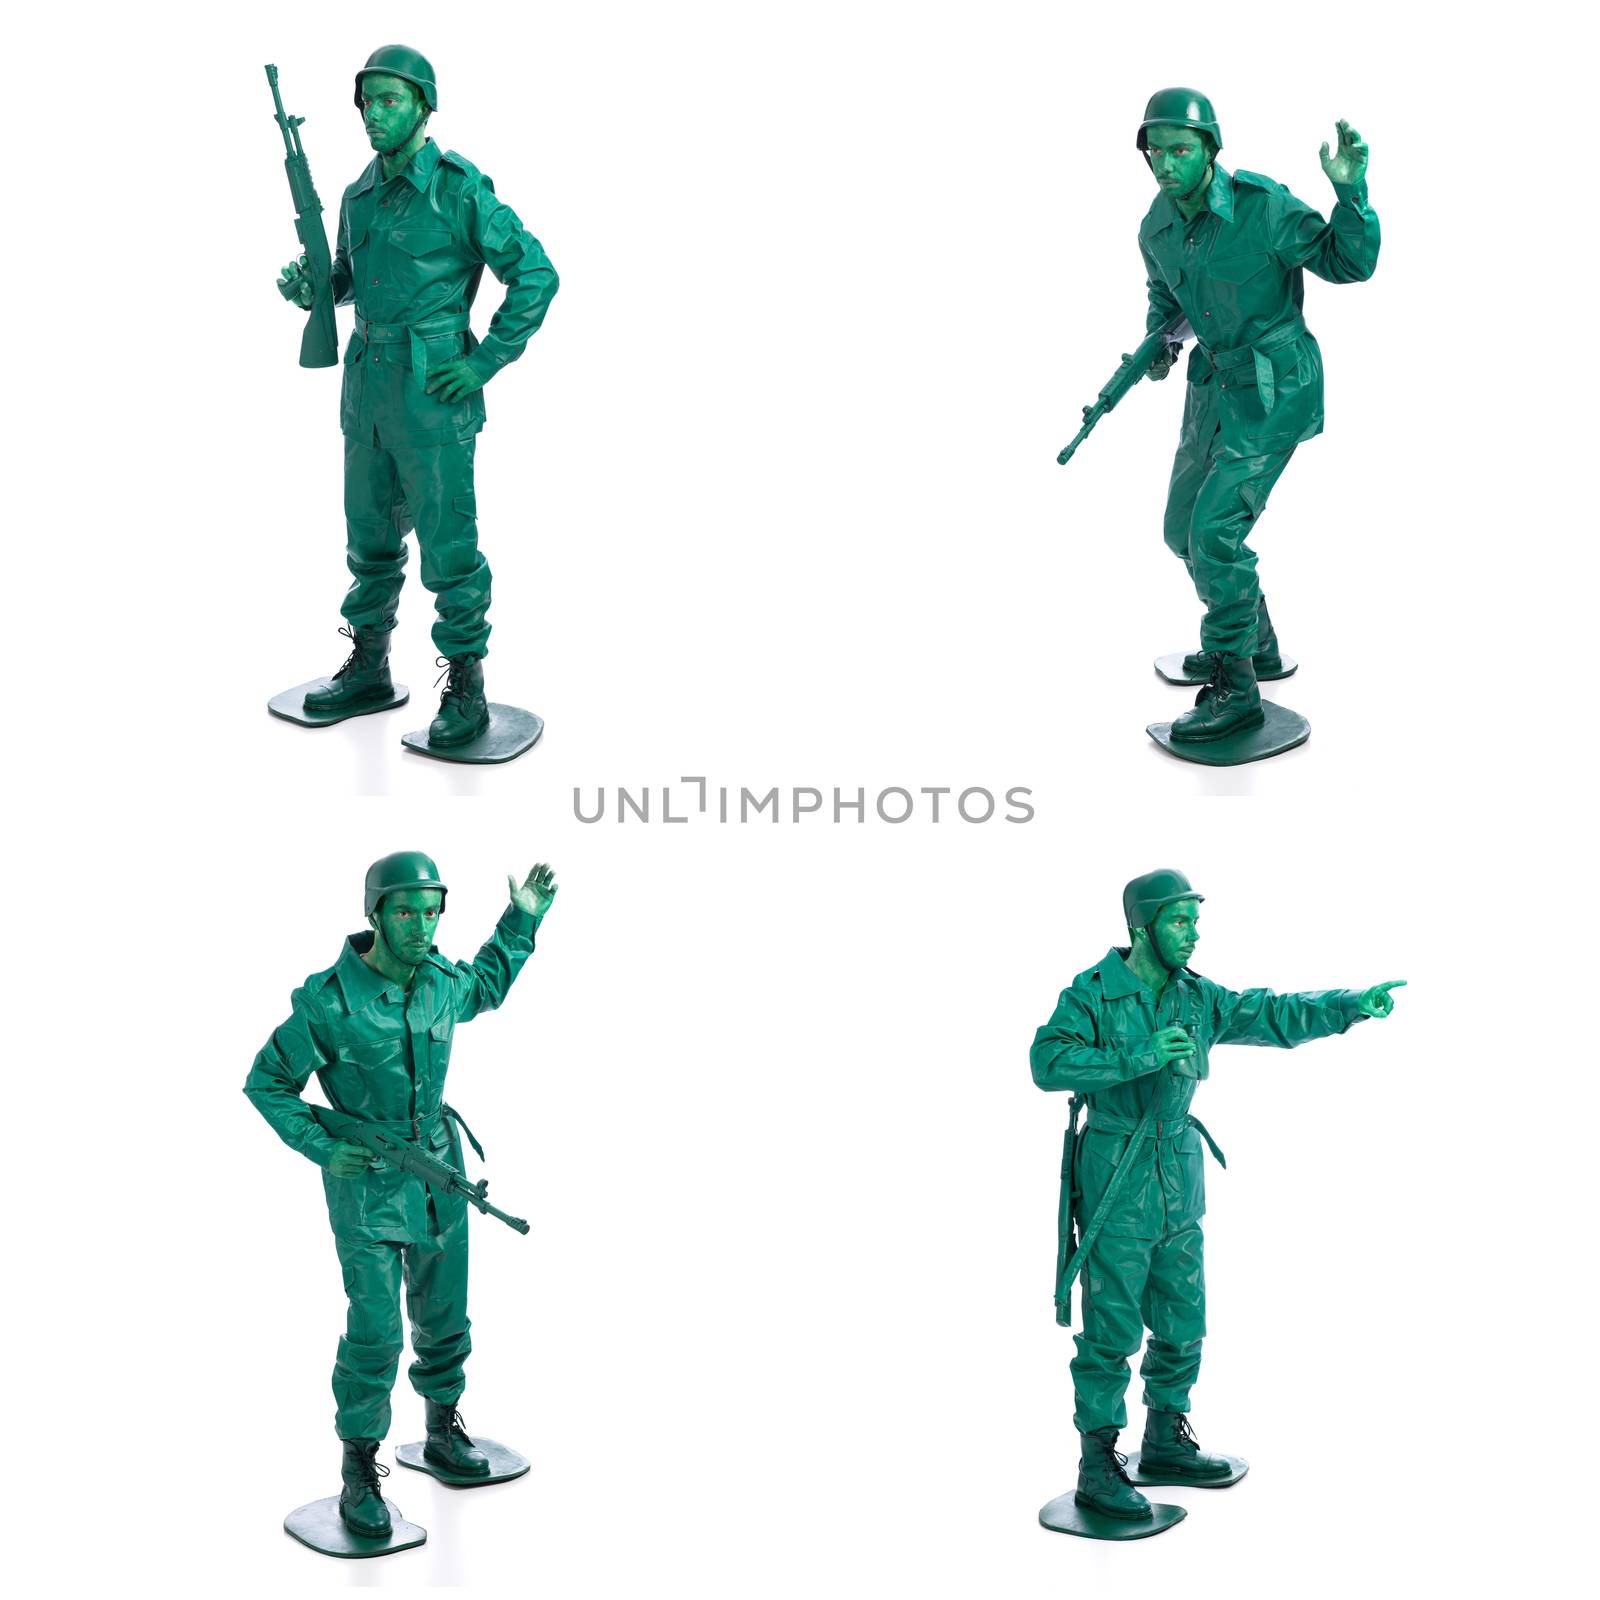 Four man on a green toy soldier costume standing with riffle isolated on white background.